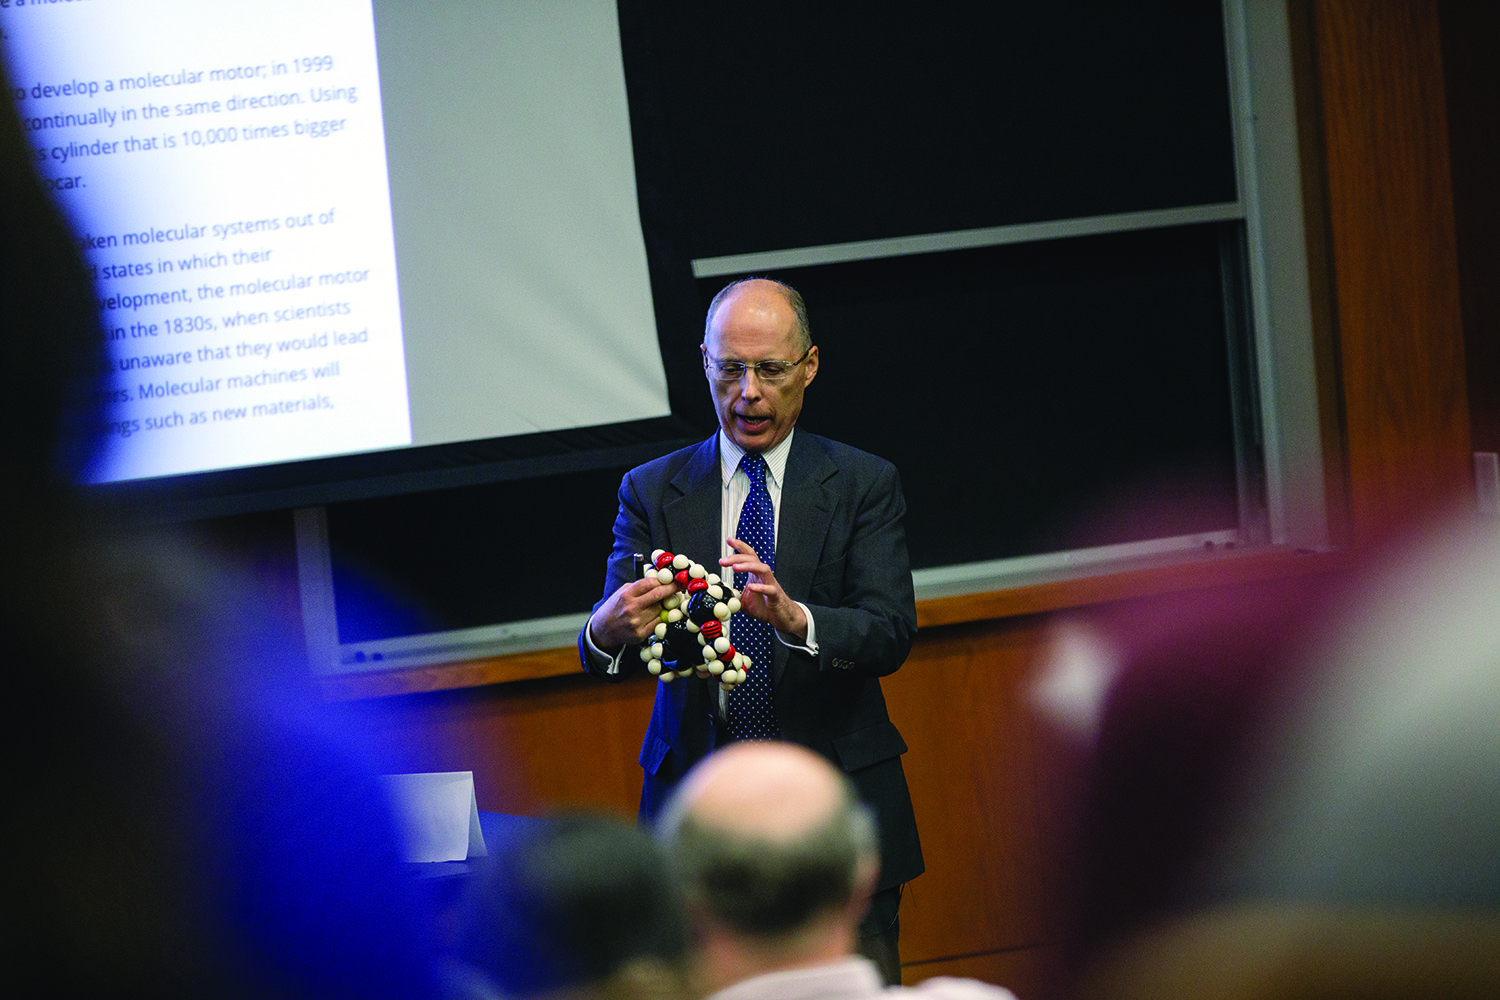 Texas A&M chemist John Gladysz holds a 3-D DNA model while he lectures to a full auditorium